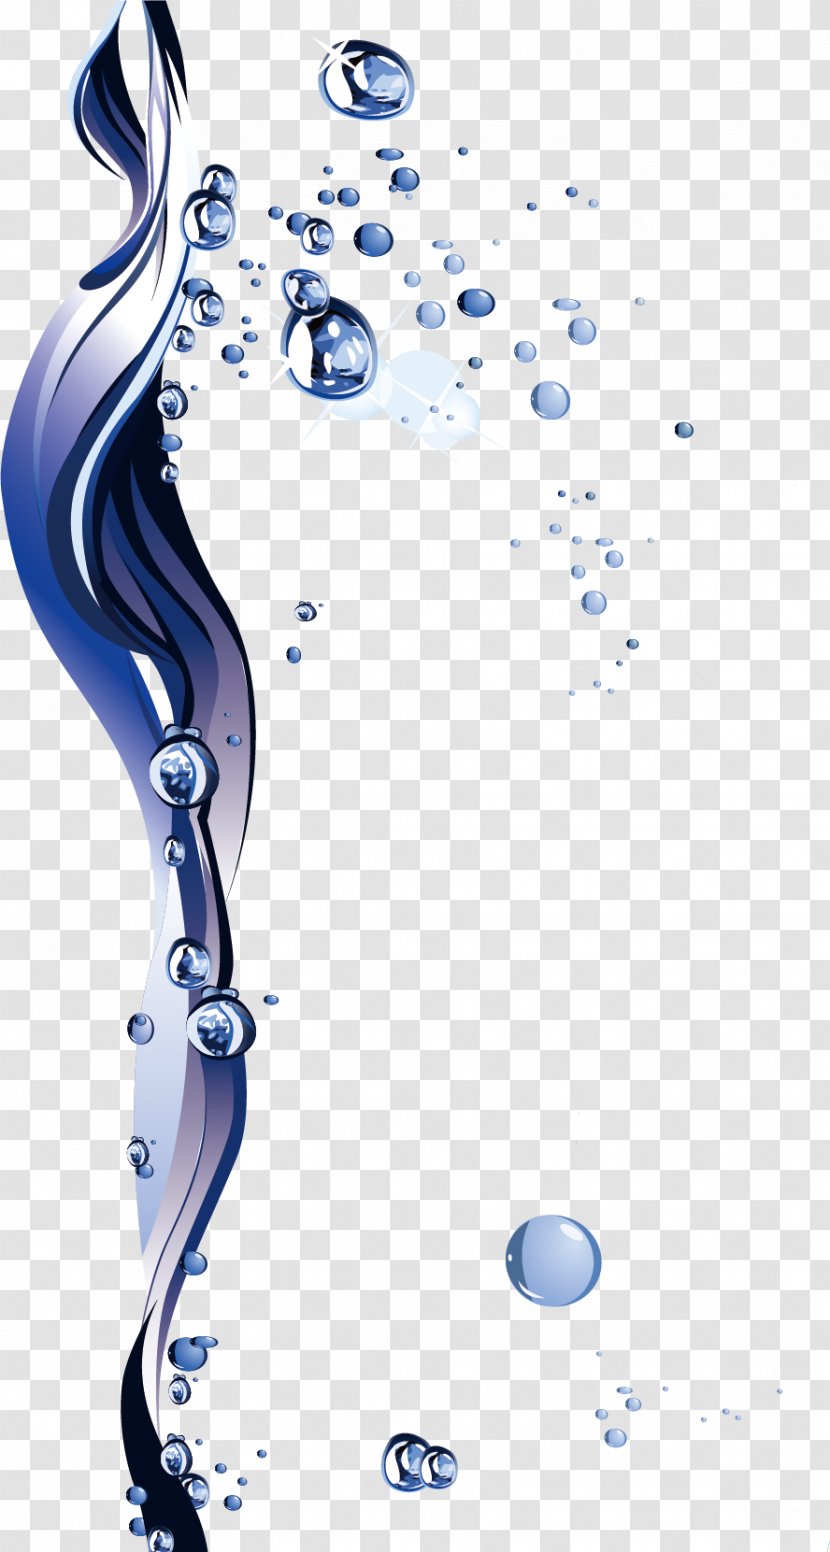 Water Drop - Knee - Creative Droplets Pattern Material Transparent PNG